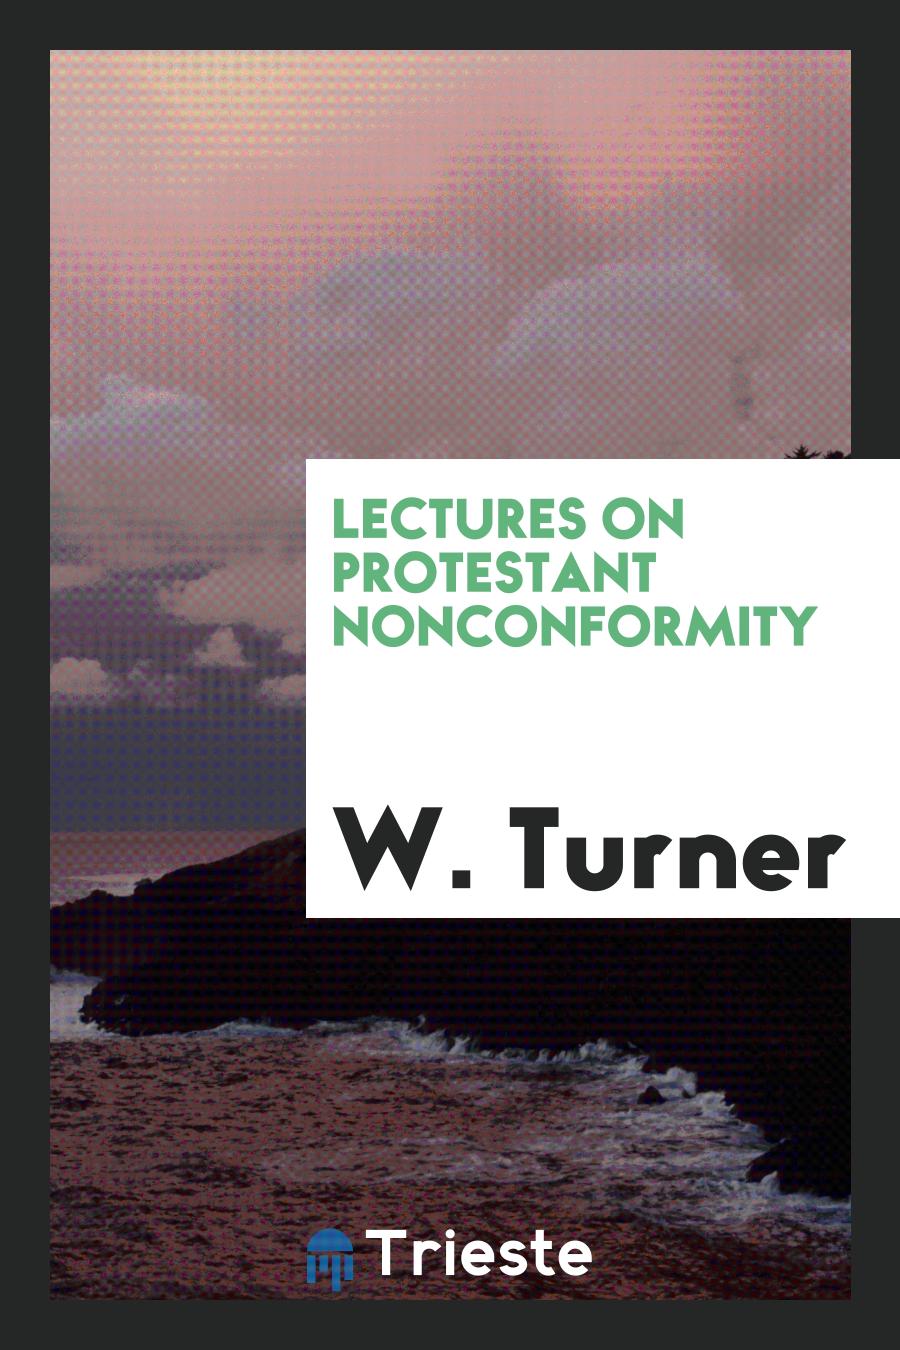 Lectures on Protestant Nonconformity